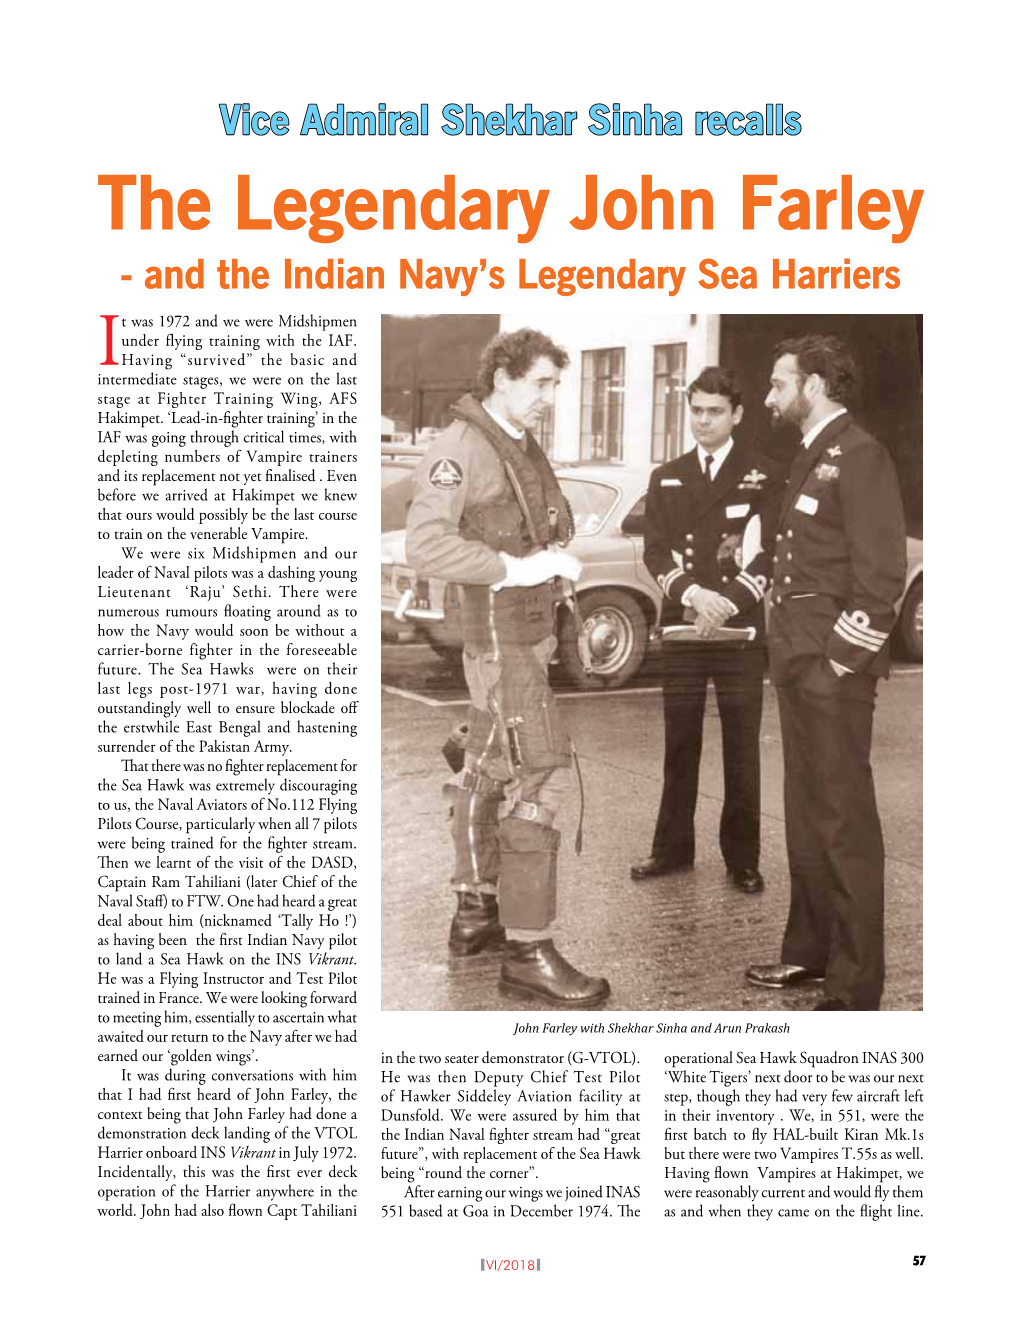 The Legendary John Farley - and the Indian Navy’S Legendary Sea Harriers